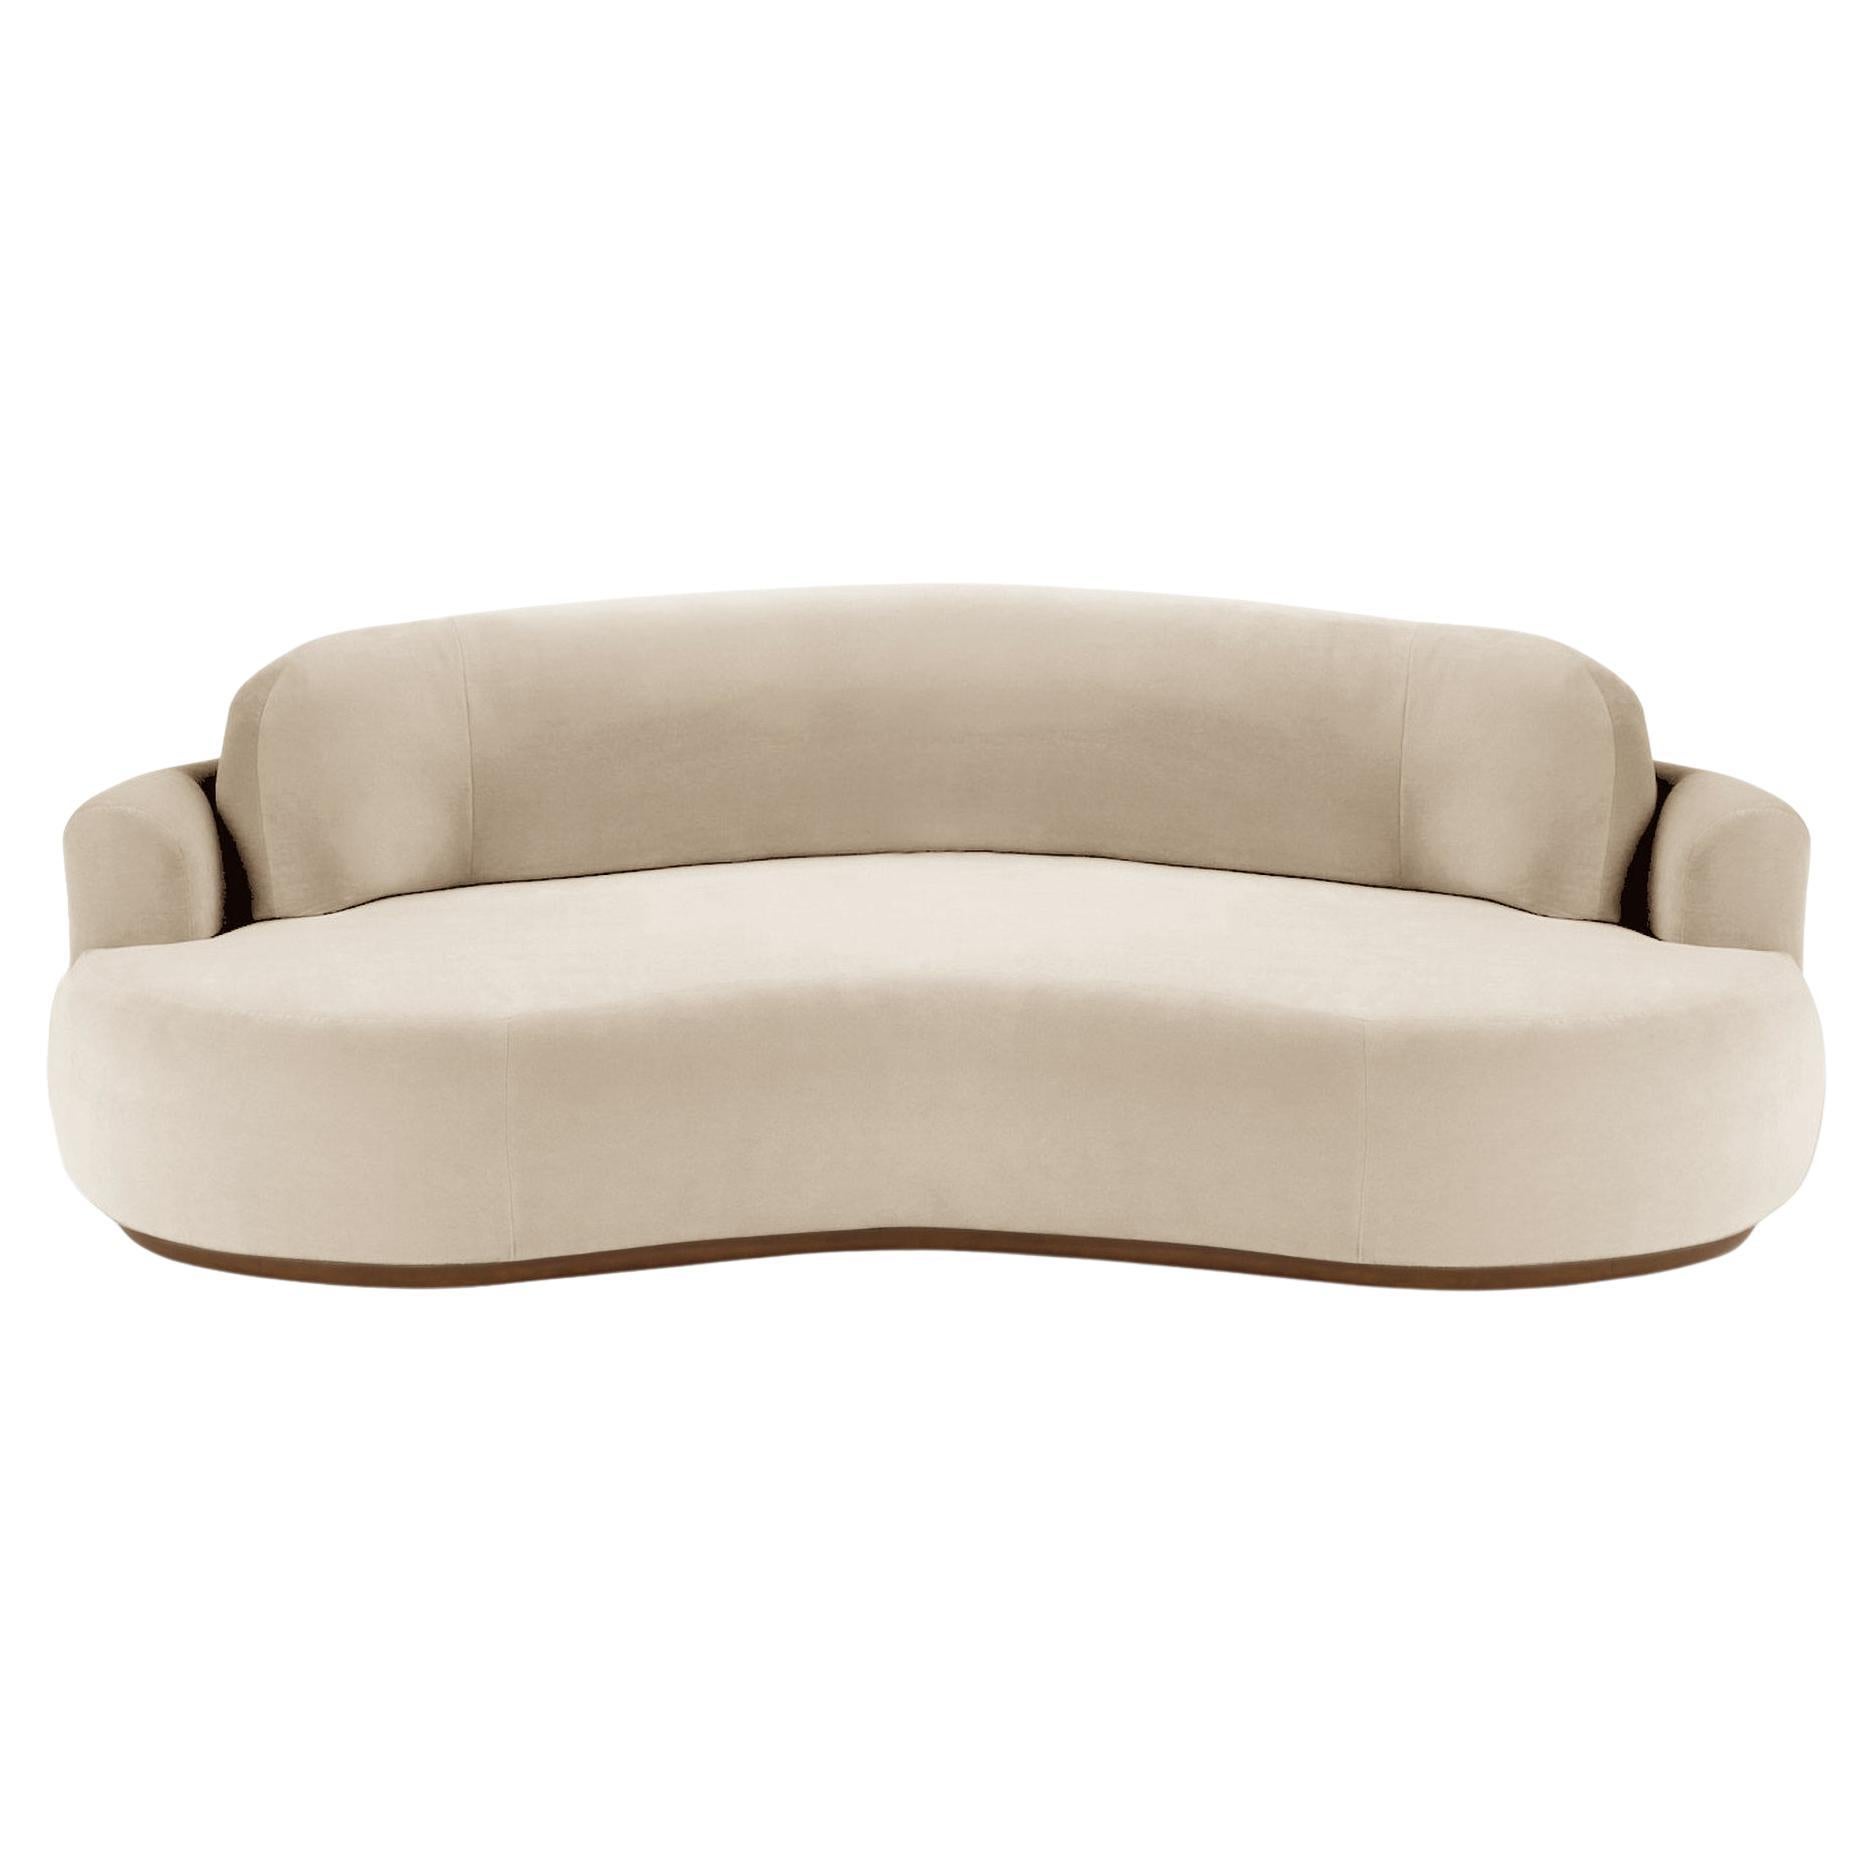 Naked Round Sofa, Medium with Beech Ash-056-1 and Boucle Snow